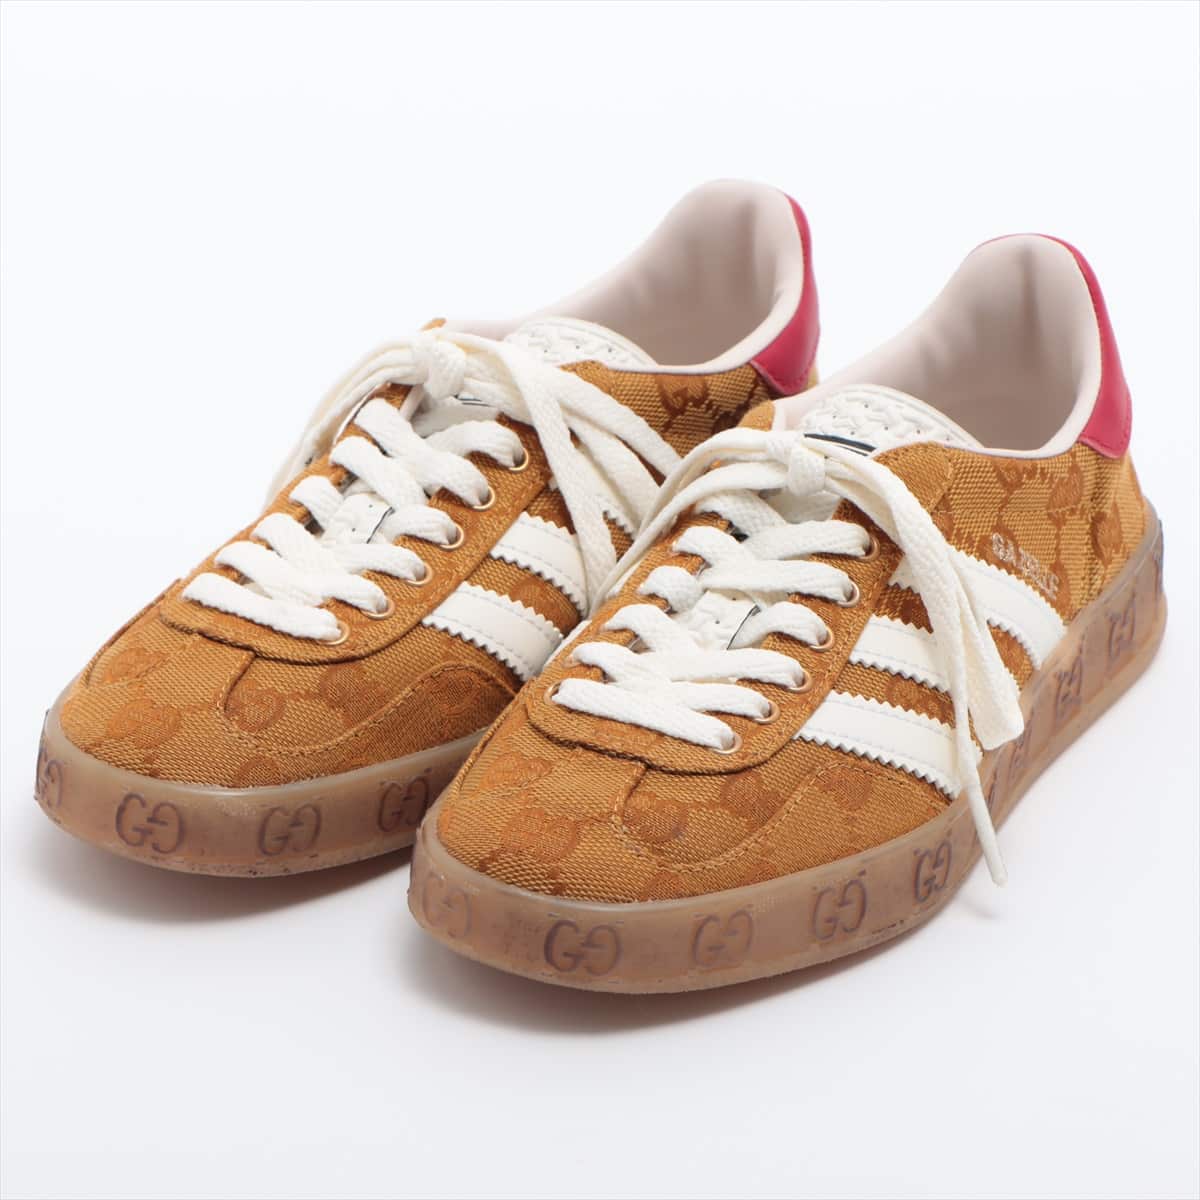 Gucci x adidas Gazelle 22 years Canvas & leather Sneakers 20.5cm Ladies' Brown GG Canvas Is there a replacement string